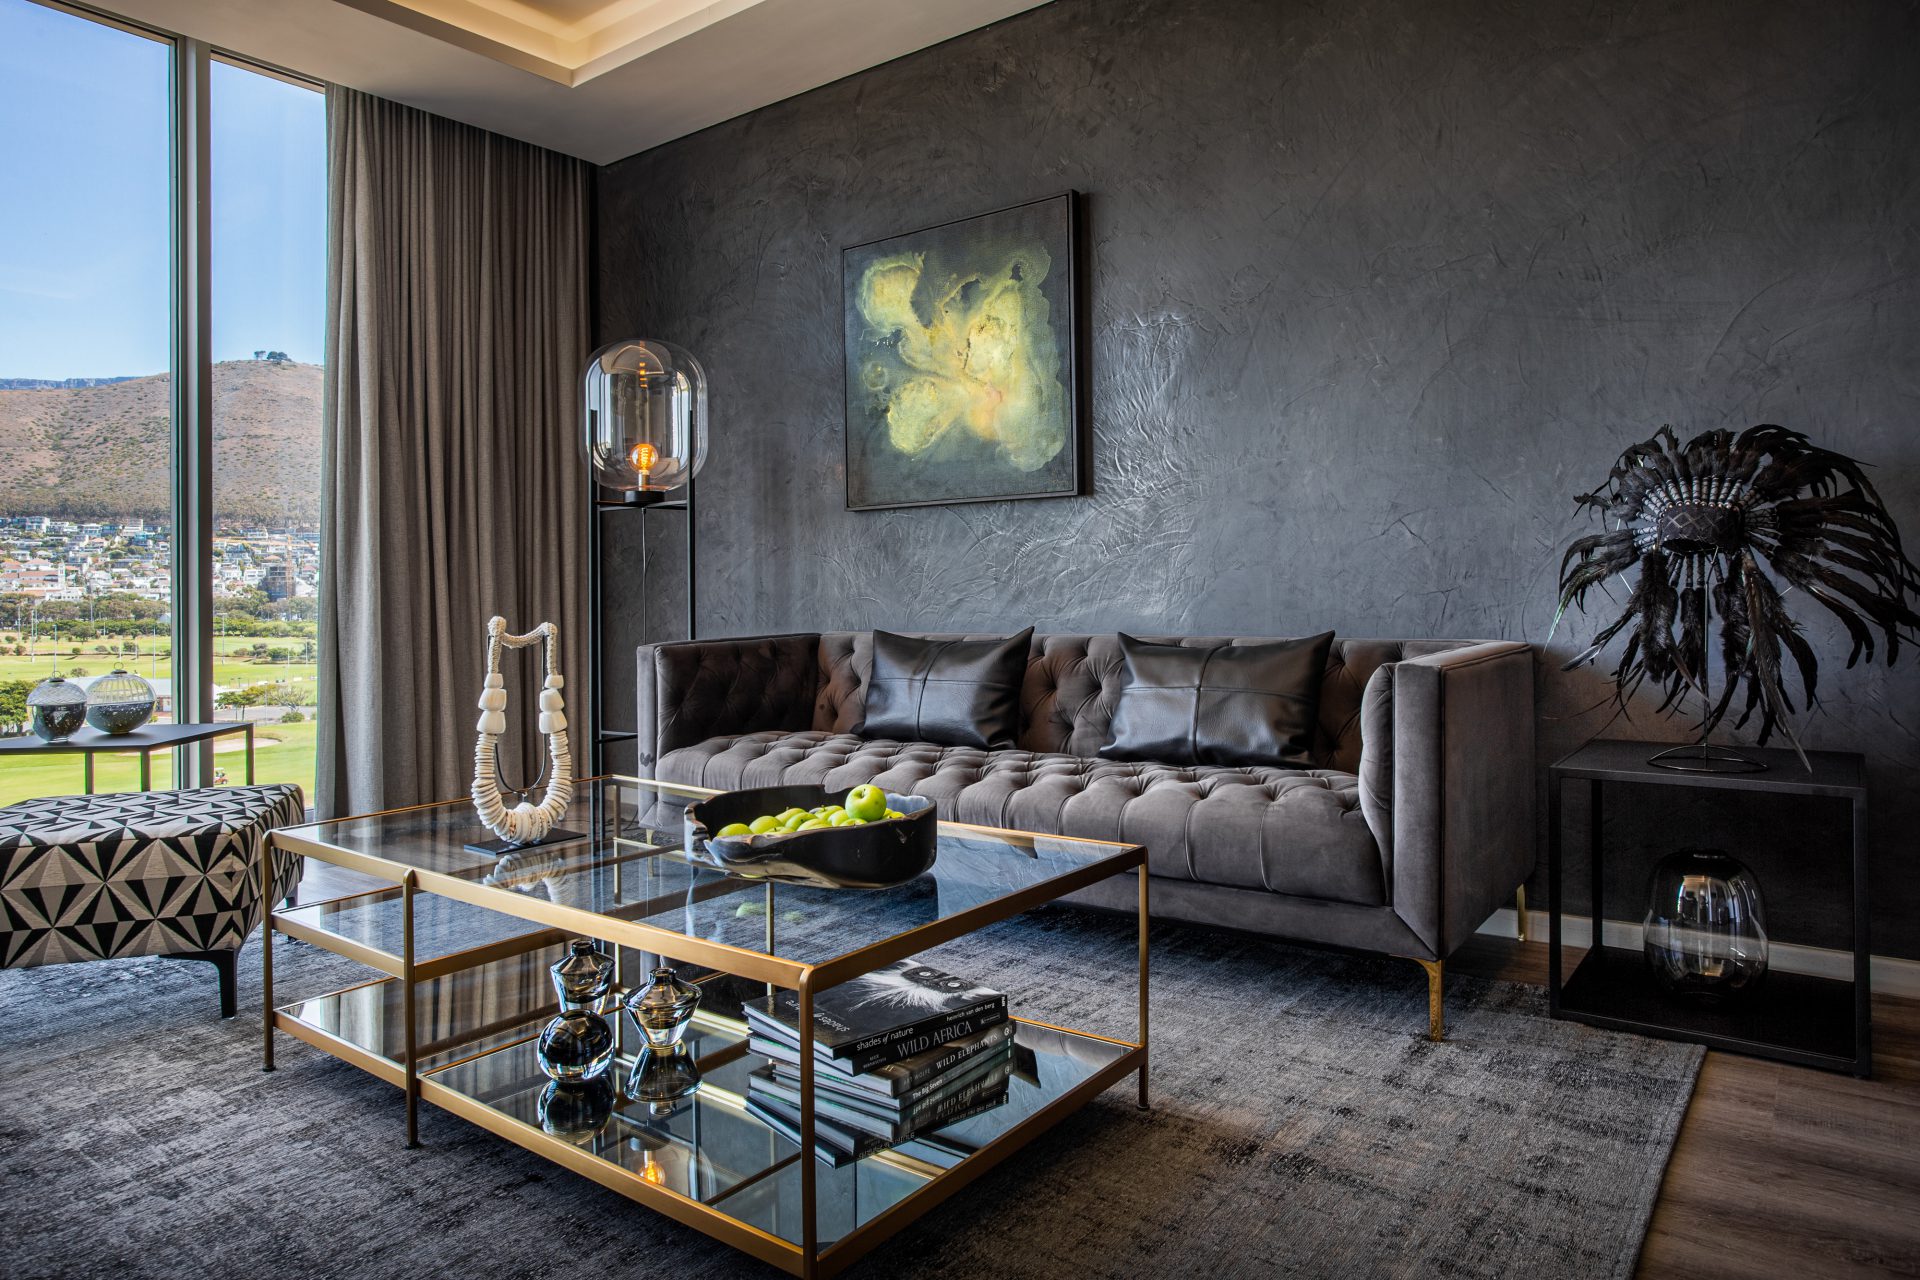 A luxurious living room setting with dark finishes and floor to ceiling windows that look out onto a golf course. The room has a couch, coffee table, lamp and a canvas on the wall.